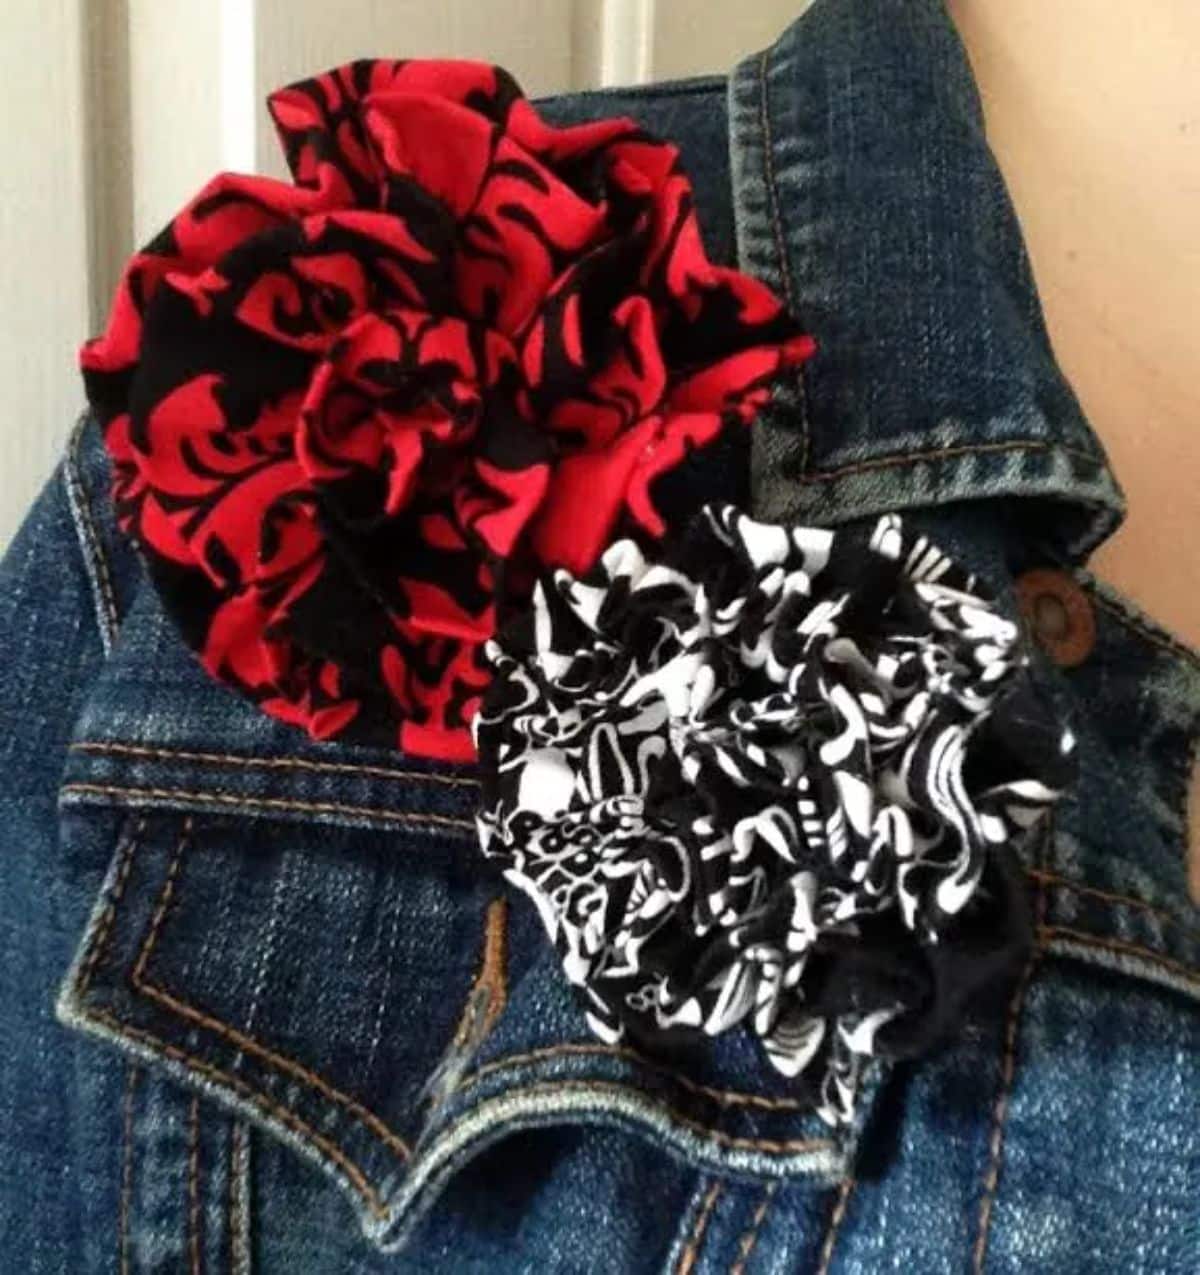 10-Minute Fabric Flower Tutorial No Sewing Machine Required